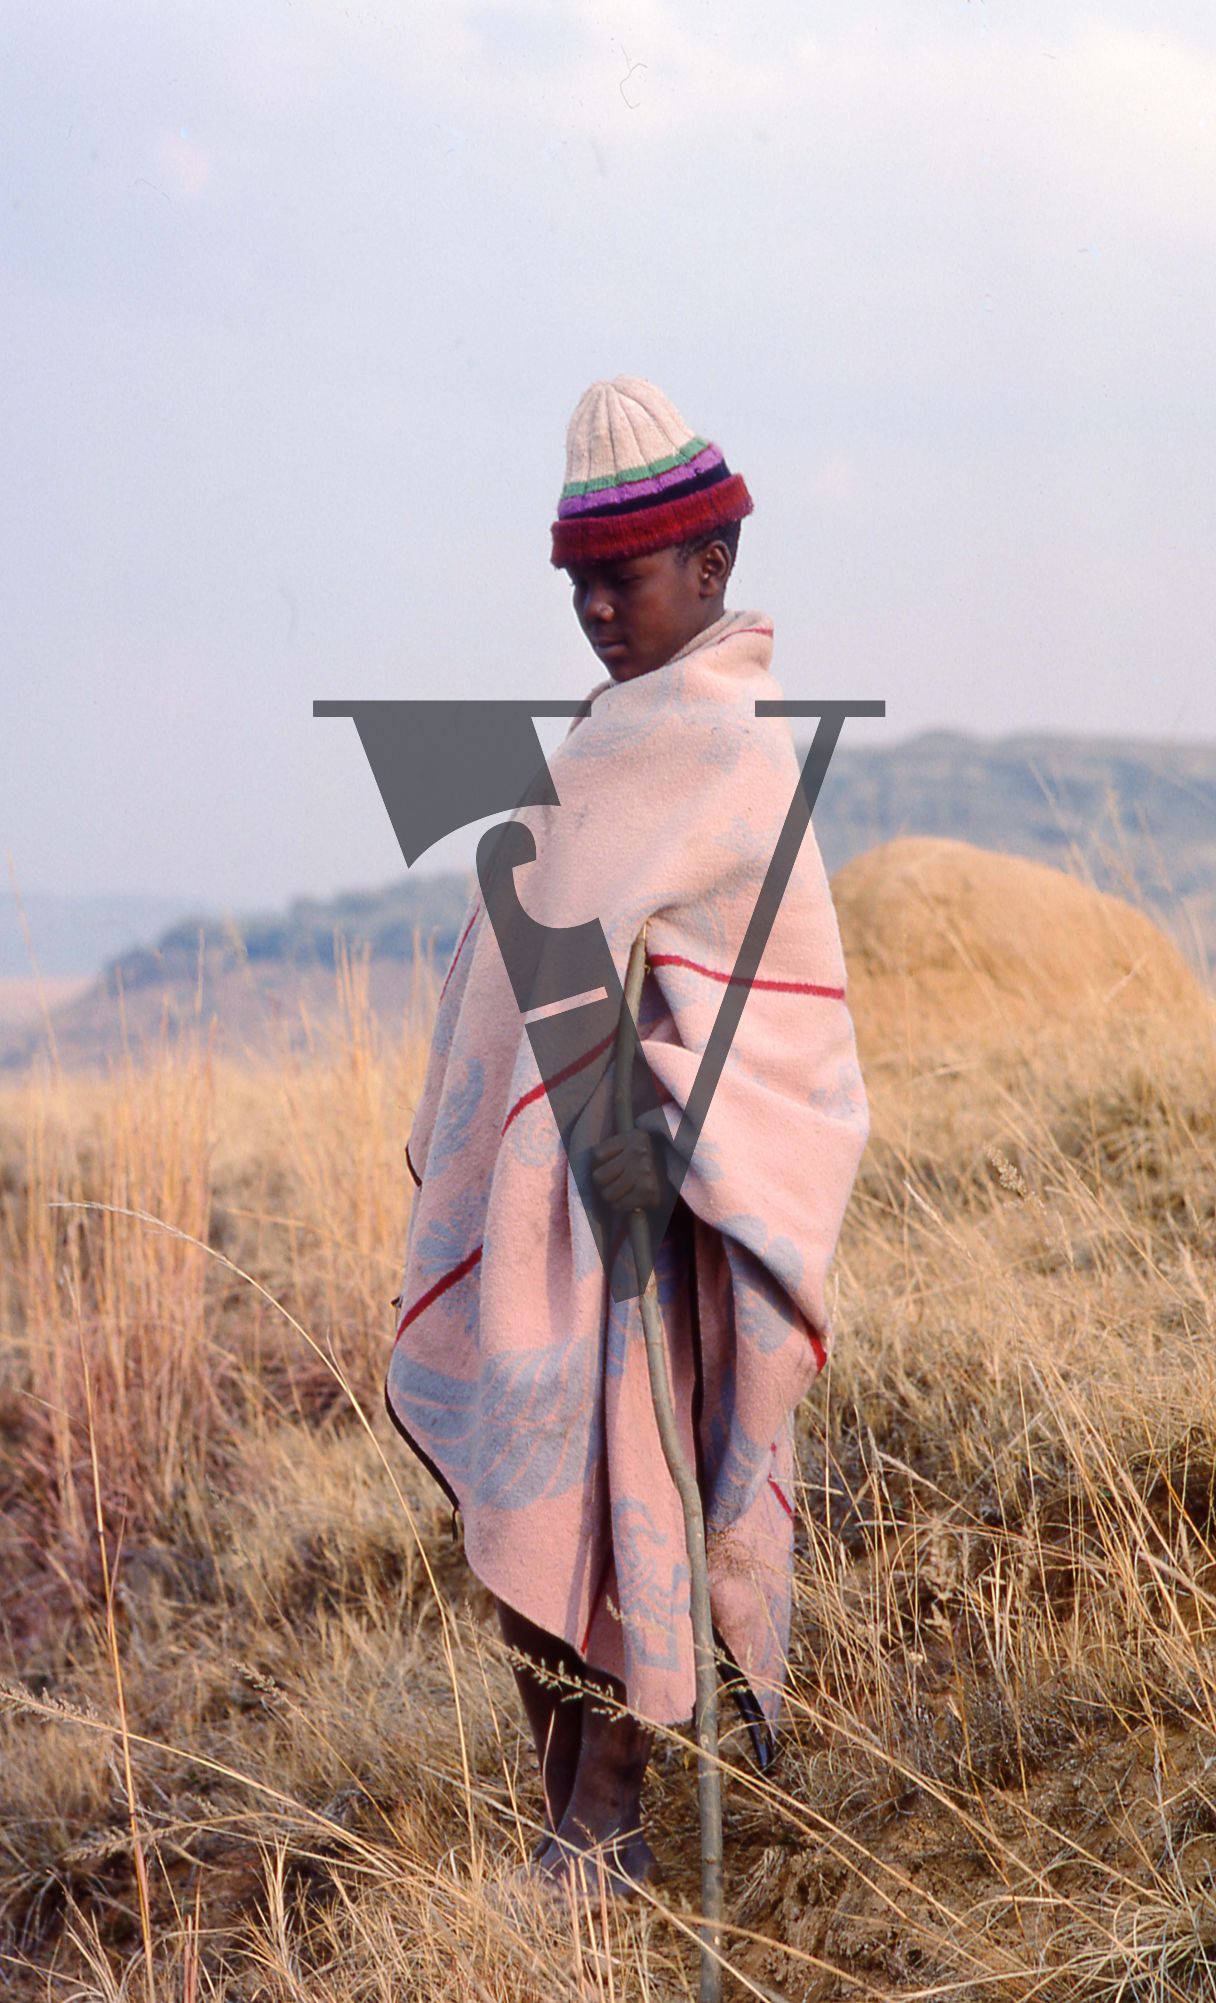 Lesotho, boy in blanket and striped hat, portrait.